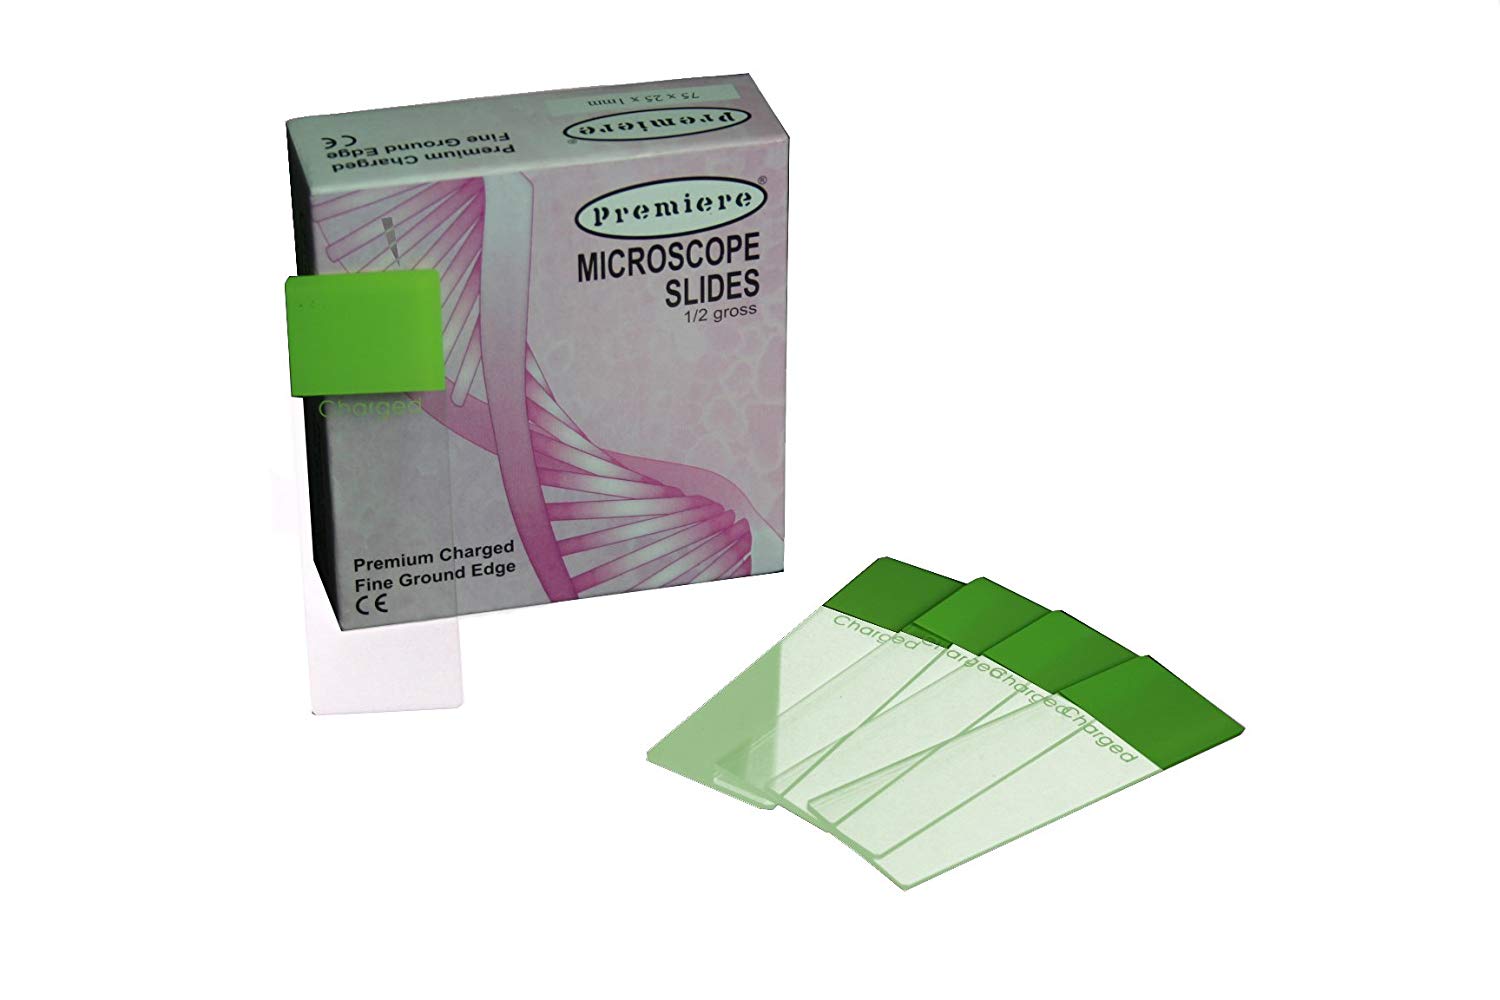 Precleaned Premiere Microscope Slides with Ground Edges Frosted End 1,440 Slides 10 gross per case 